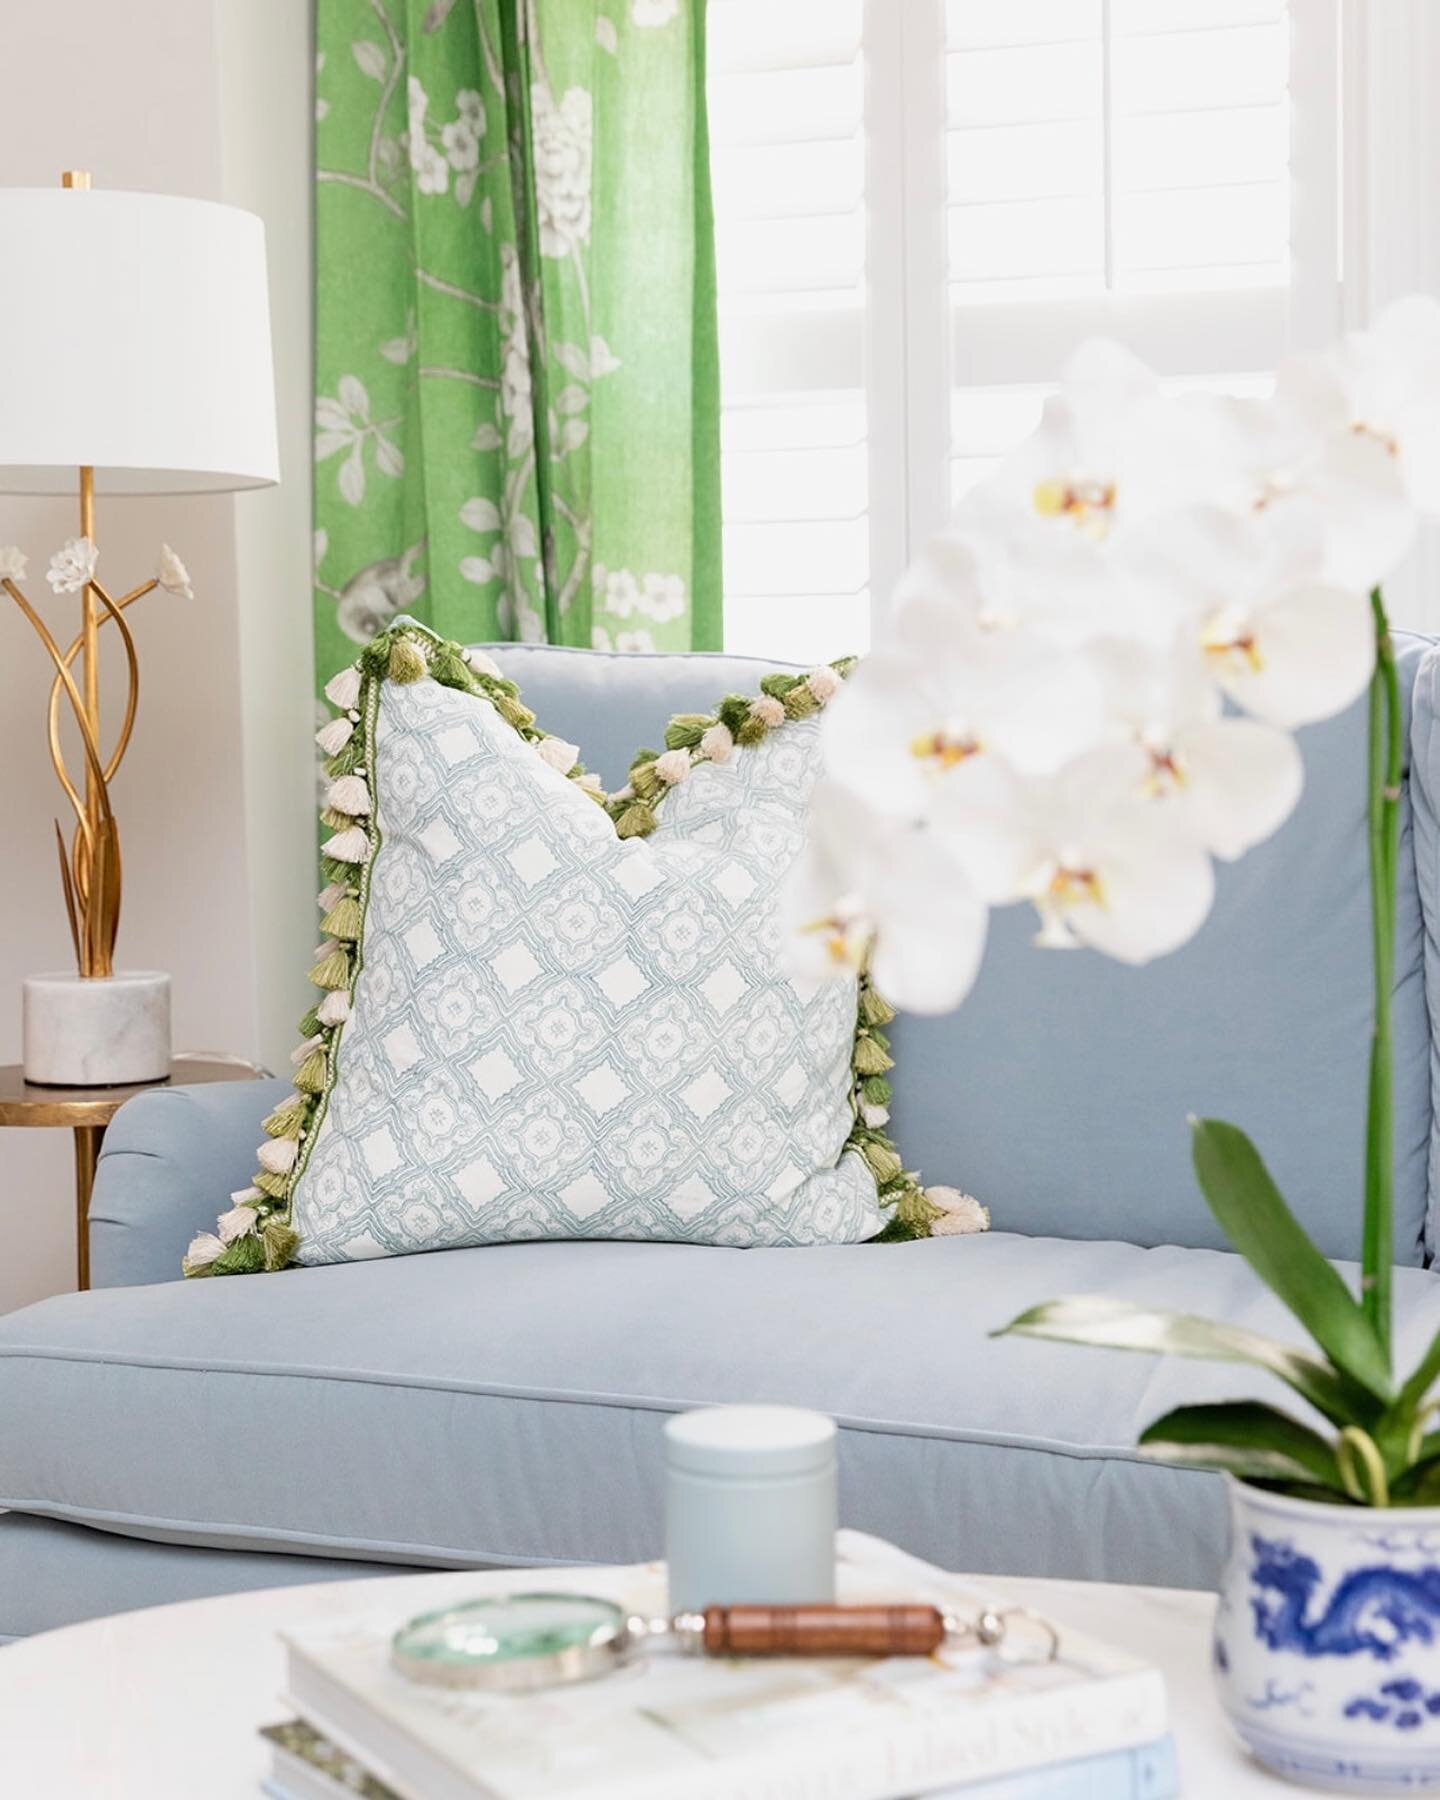 Still smitten with this coastal grandmillennial living room.🛋️🤍It's a delightful blend of chinoiserie charm, a soothing blue-green palette, and timeless southern details. 

Find more pics &amp; details from this project on the blog!